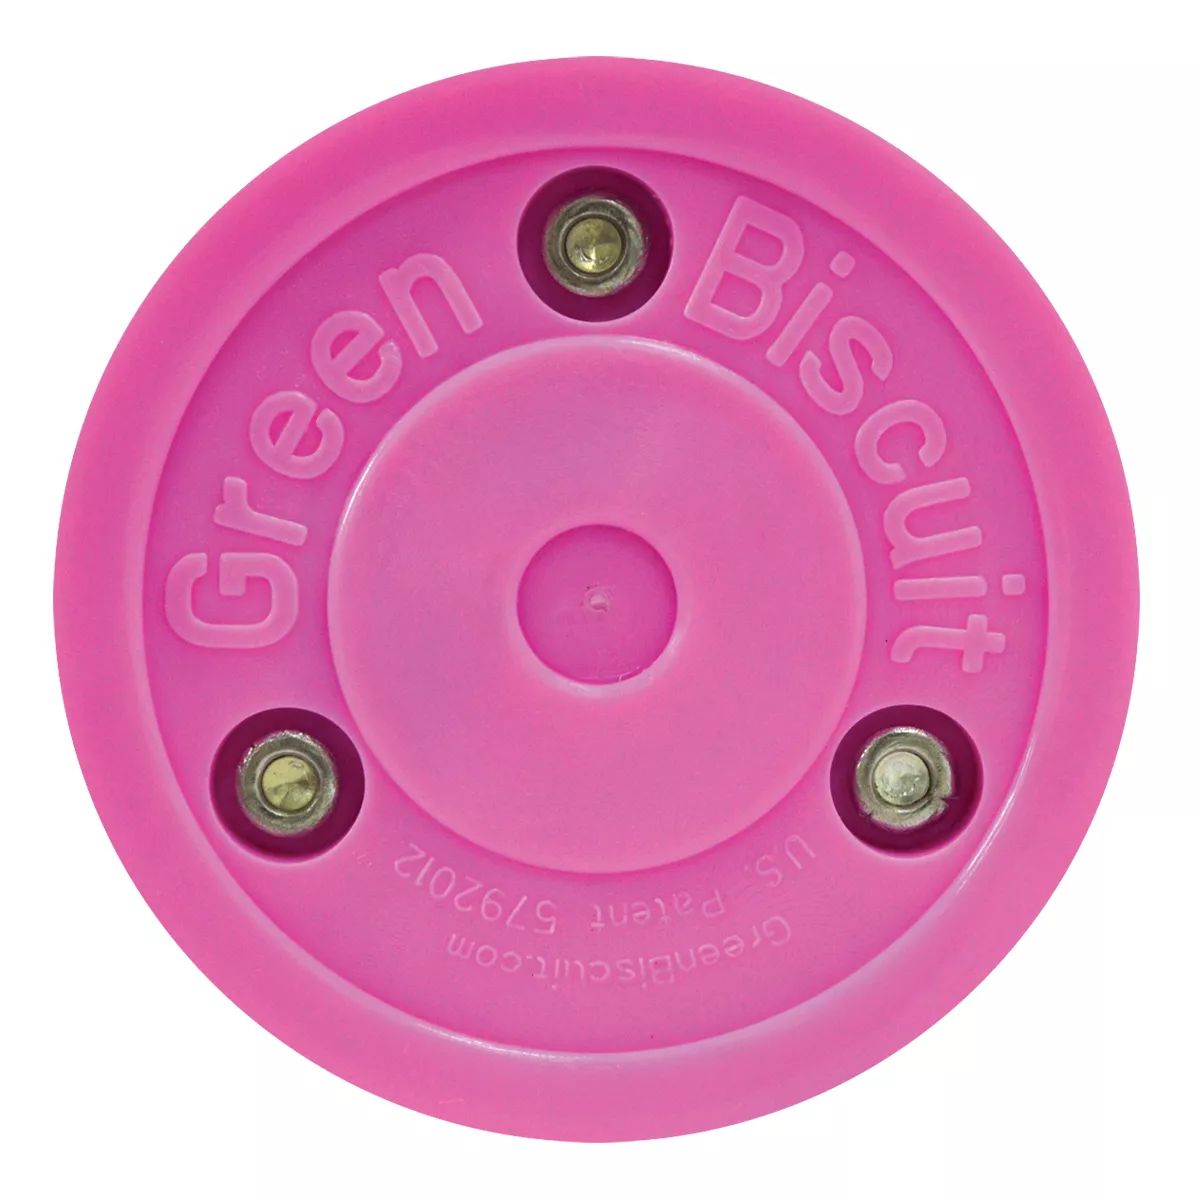 Image of Green Biscuit Training Puck - Pink